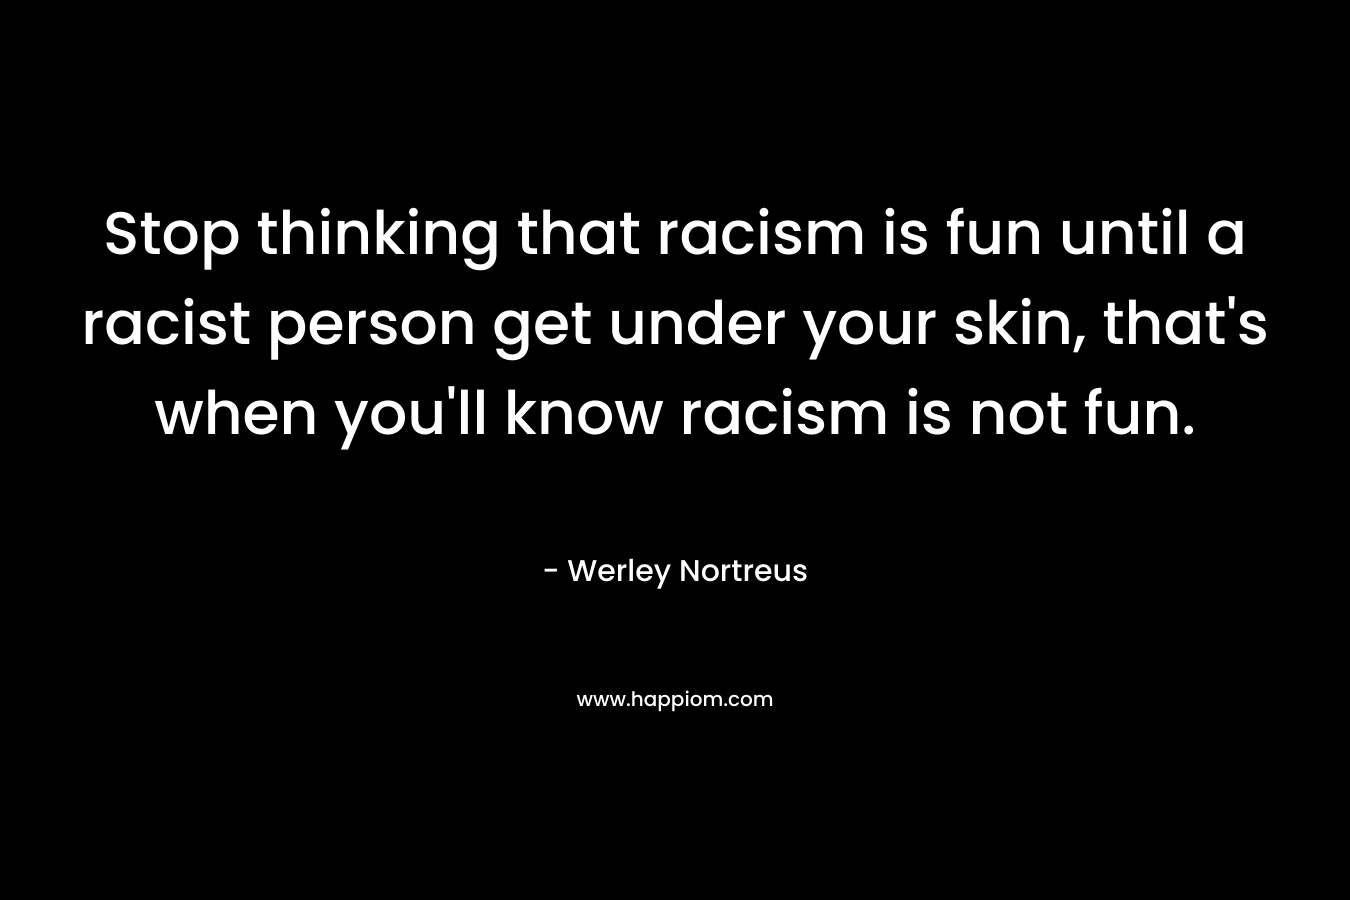 Stop thinking that racism is fun until a racist person get under your skin, that's when you'll know racism is not fun.